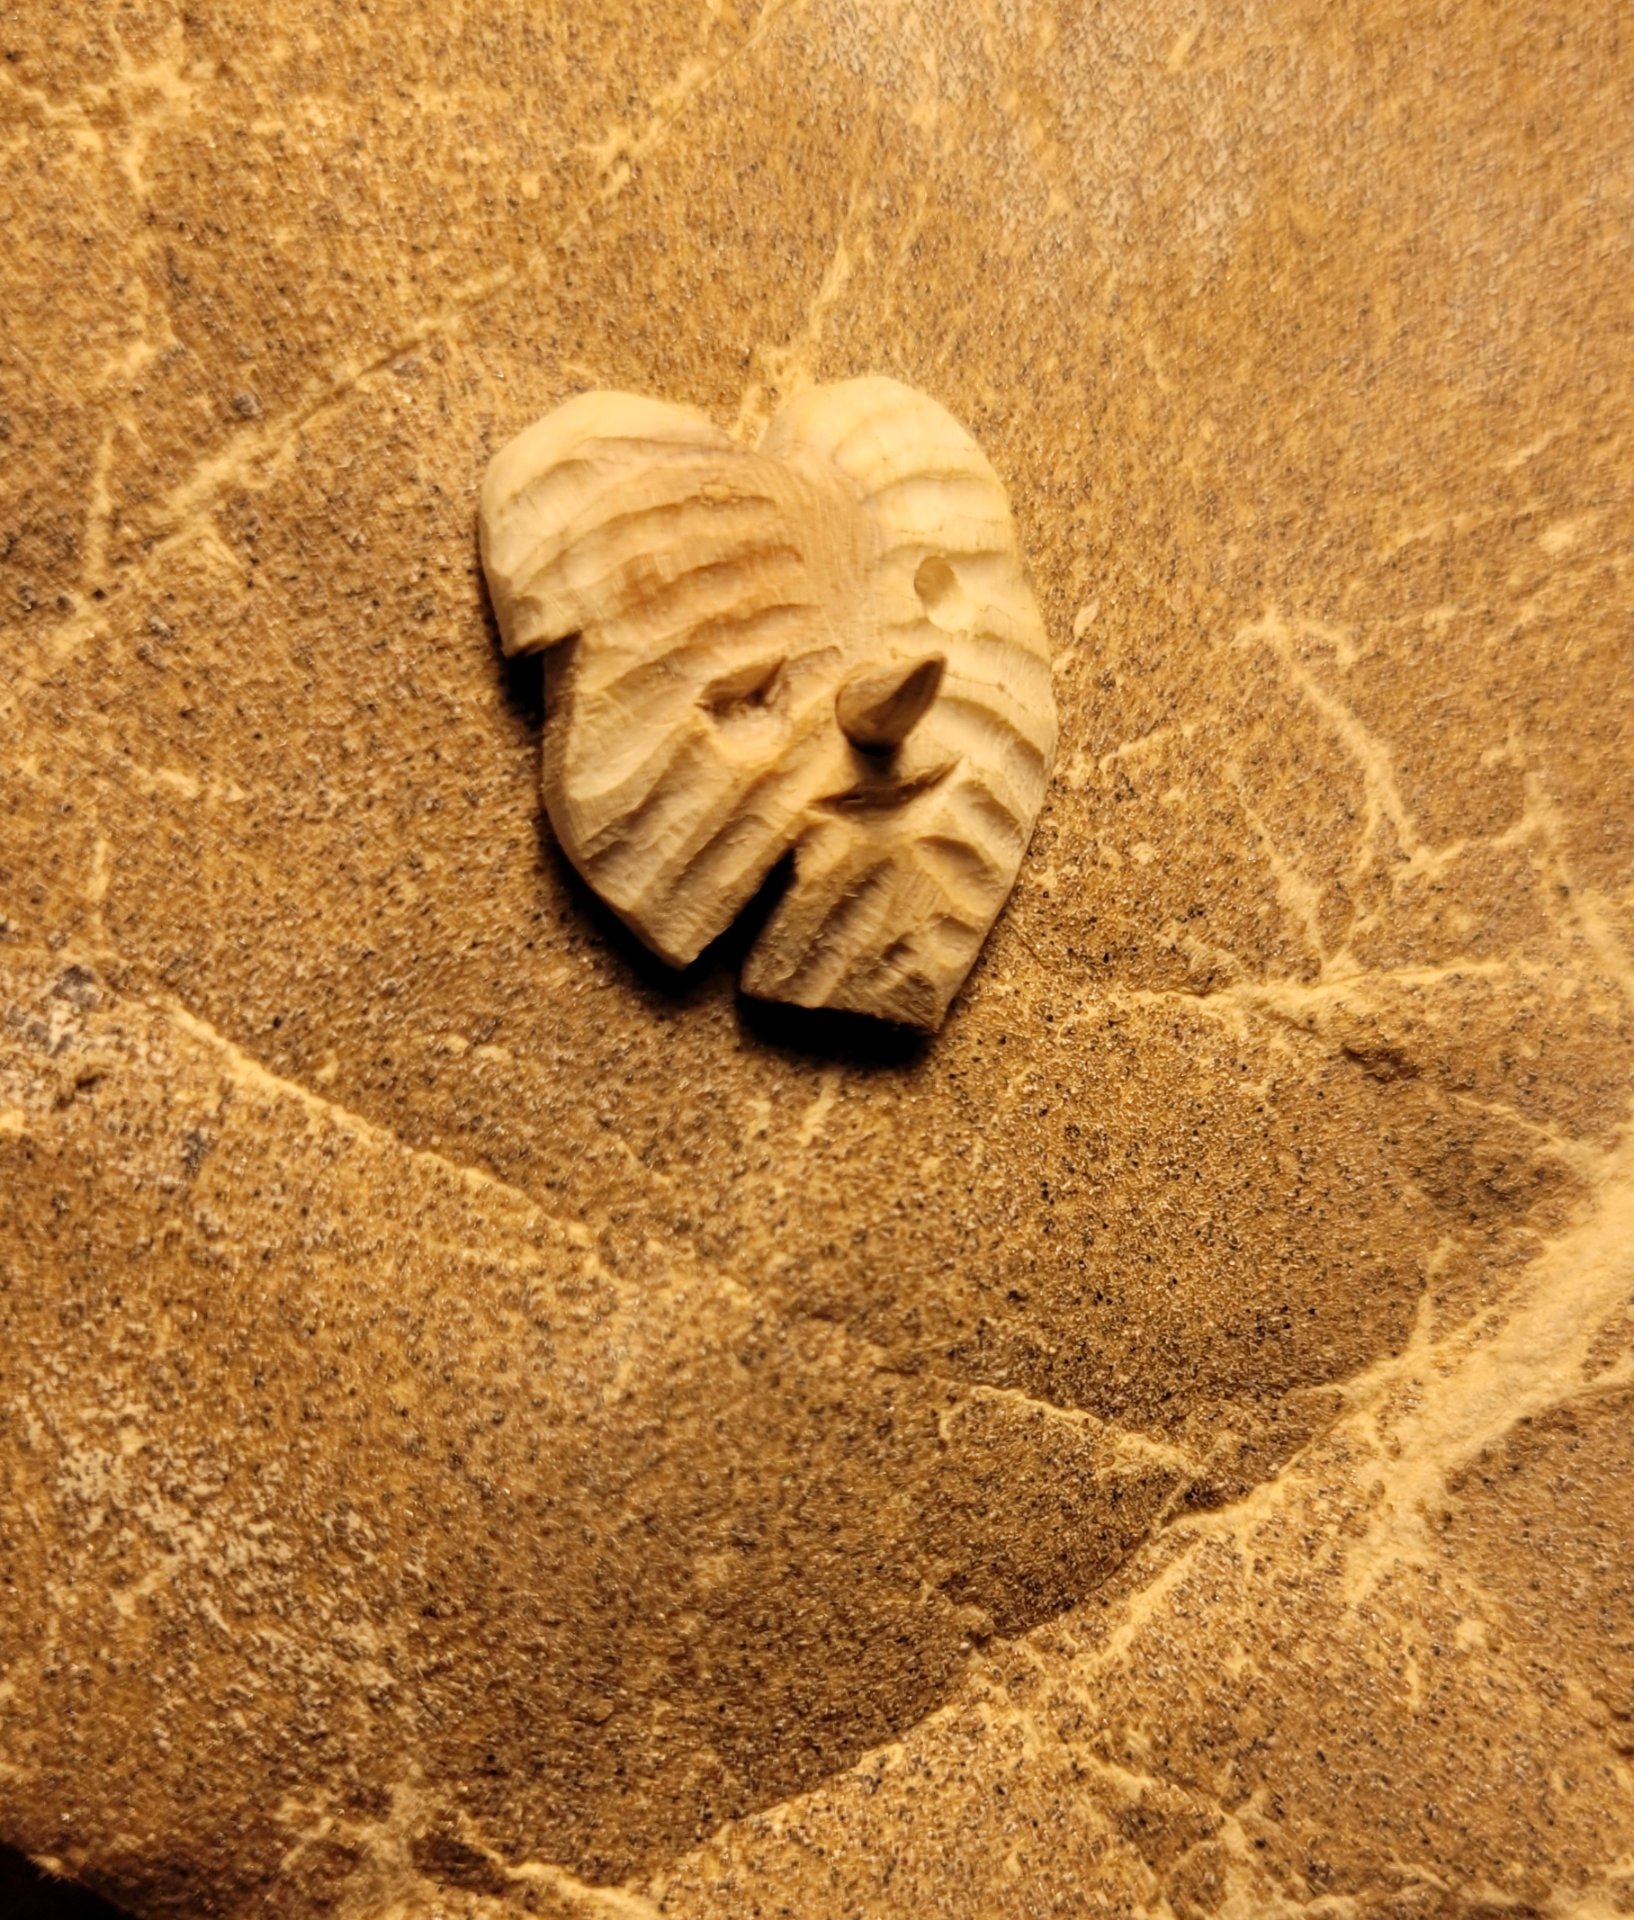 the carved mask, with a stick nose glued into a hole in the front